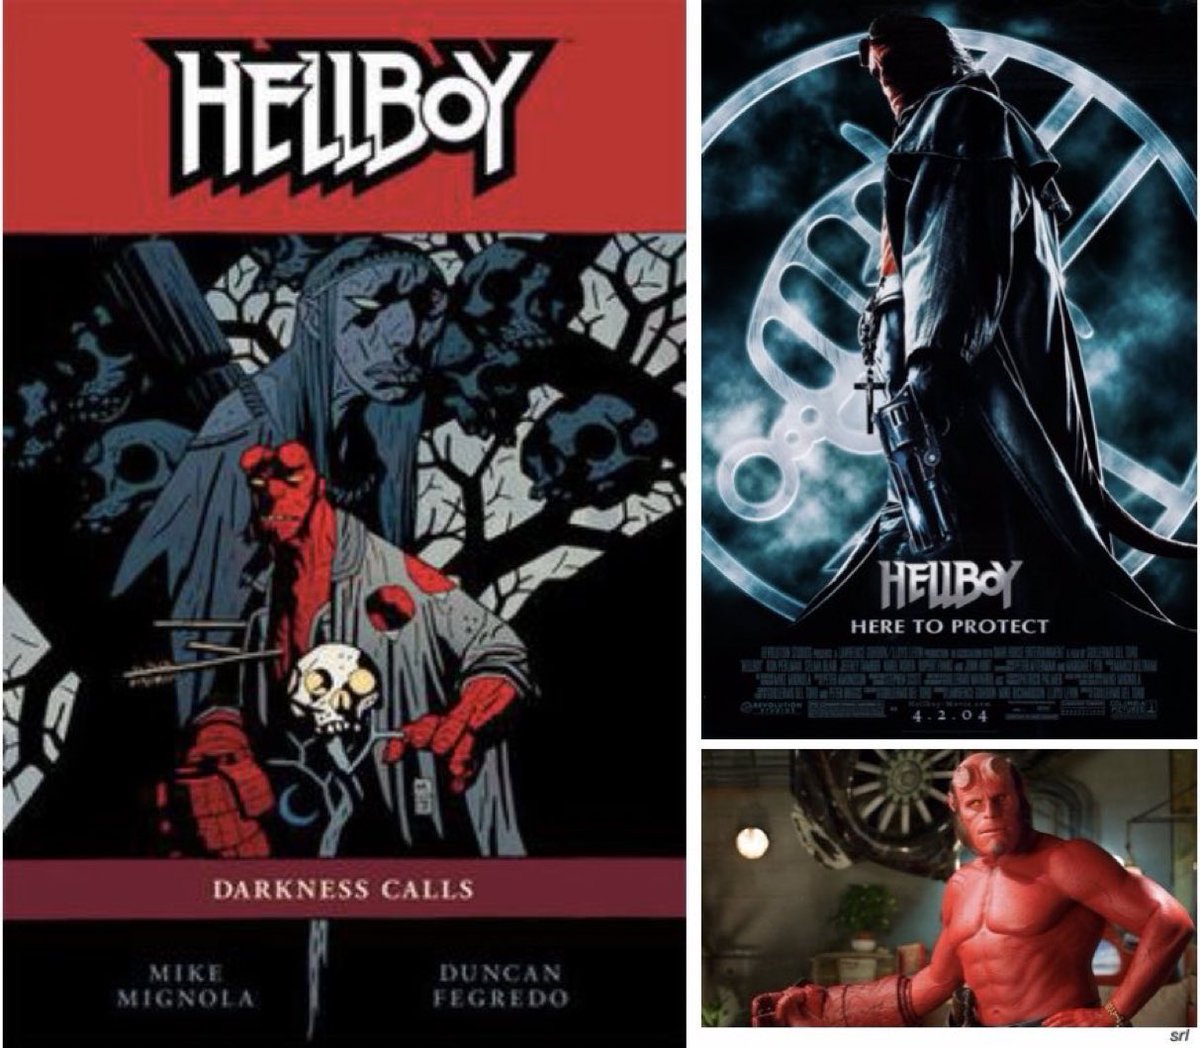 10:05pm TODAY on @ITV4

The 2004 #Action #Fantasy film🎥 “Hellboy” directed by #GuillermoDelToro & co-written with #PeterBrigg

Based on the comic book character created by #MikeMignola

🌟#RonPerlman #JohnHurt #SelmaBlair #RupertEvans #KarelRoden #JeffreyTambor